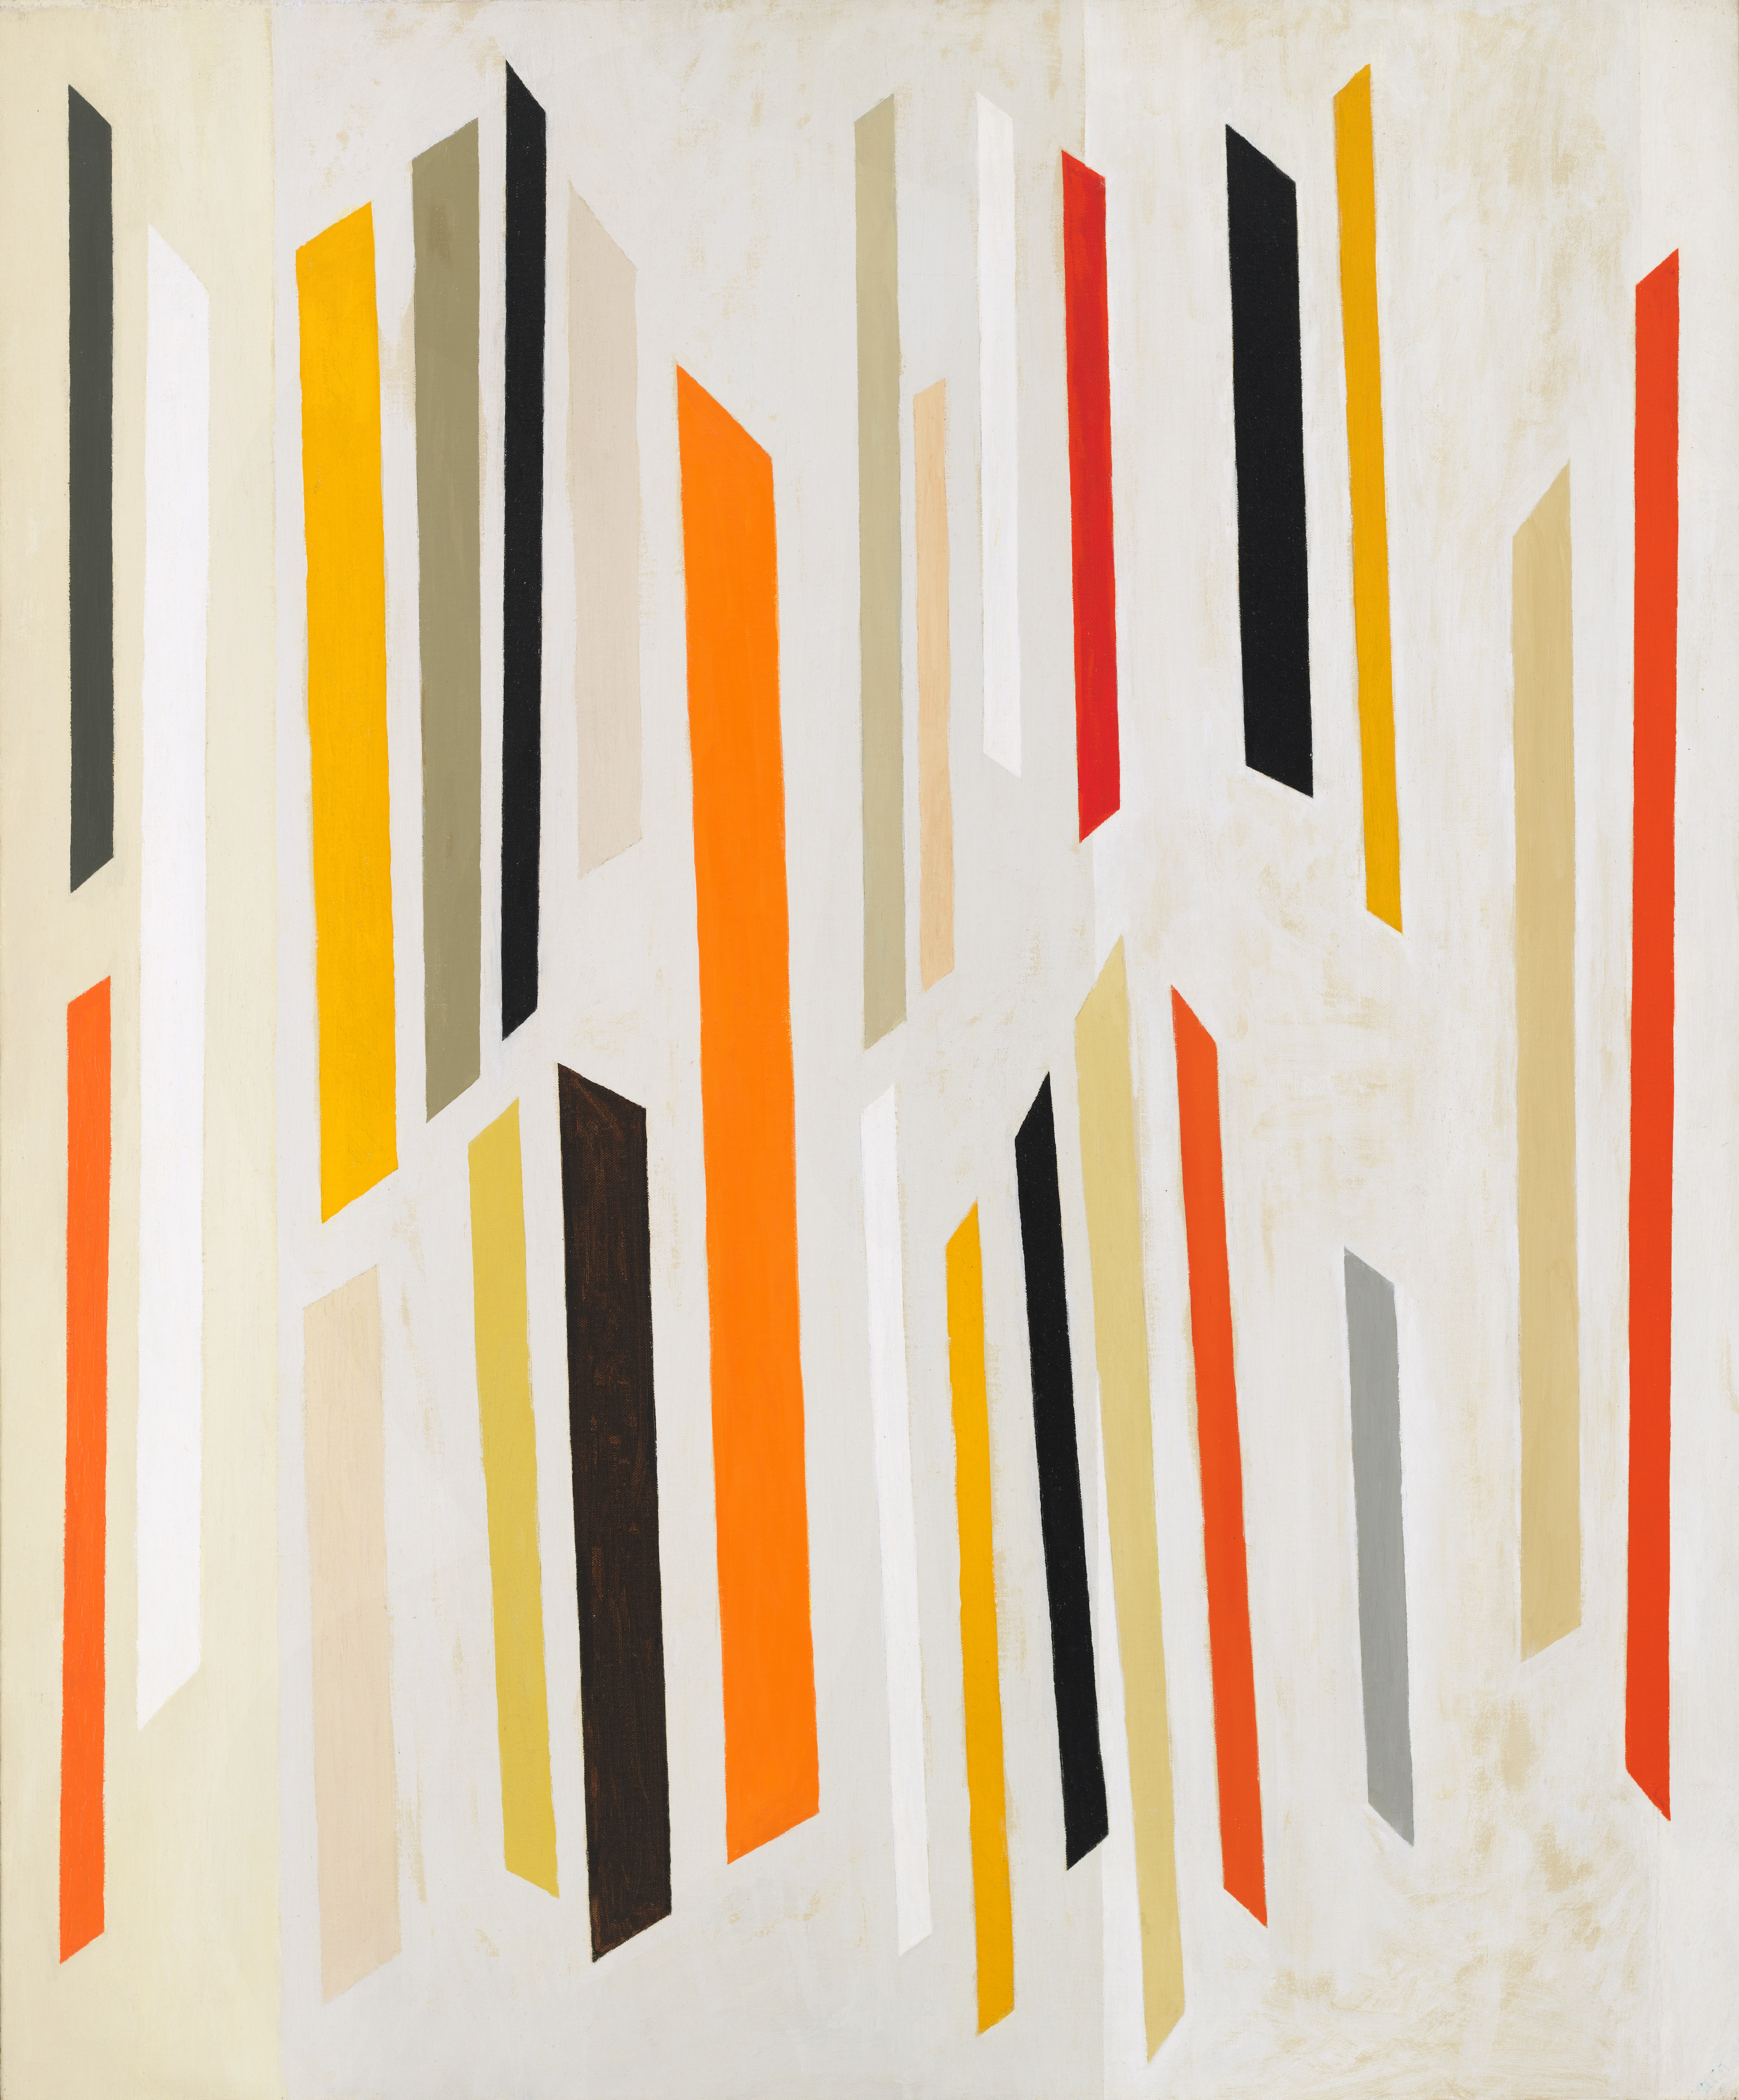 Abstract oil on canvas painting, comprised of thin, slanted rectangles on a light white/cream background. The colors of the rectangles are bright variations of reds, oranges, greys, pinks, black, and white.